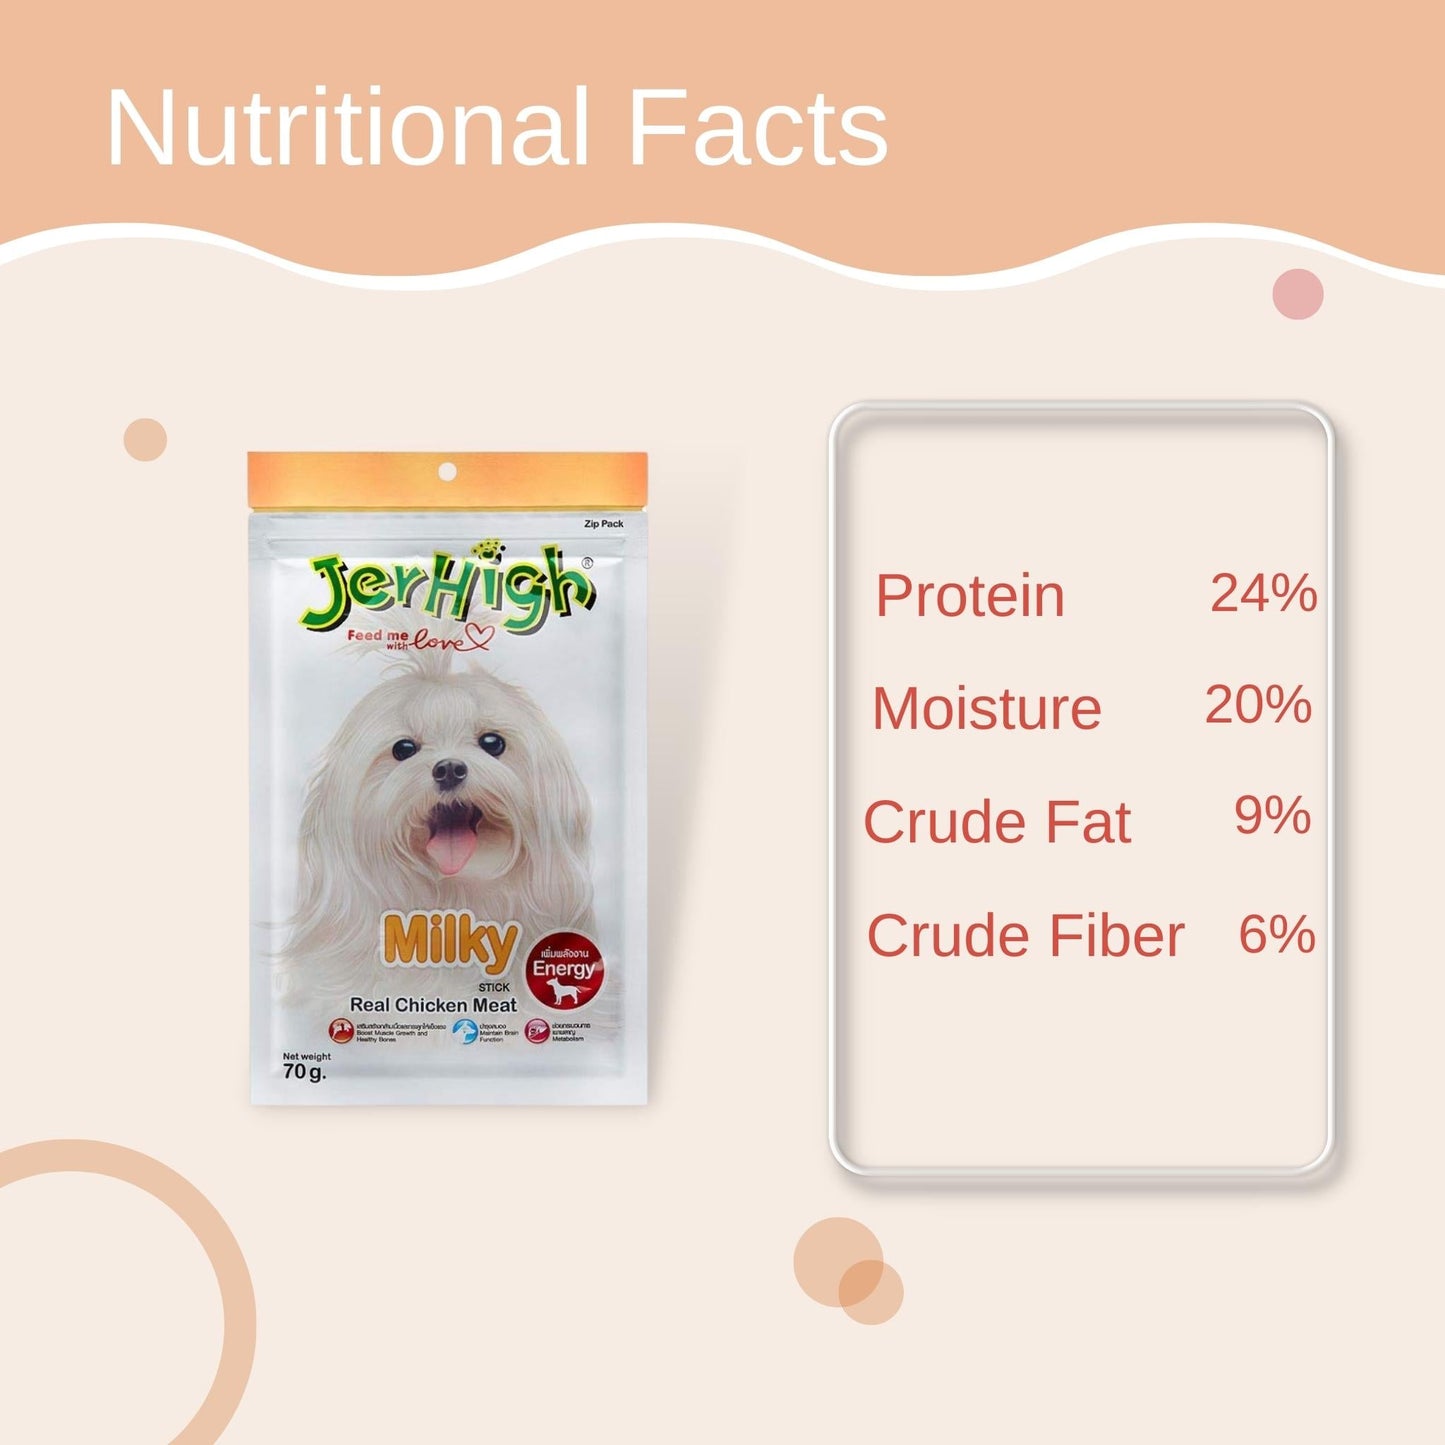 JerHigh Milky Stick Dog Treat with Real Chicken Meat - 70gm, Pack of 12